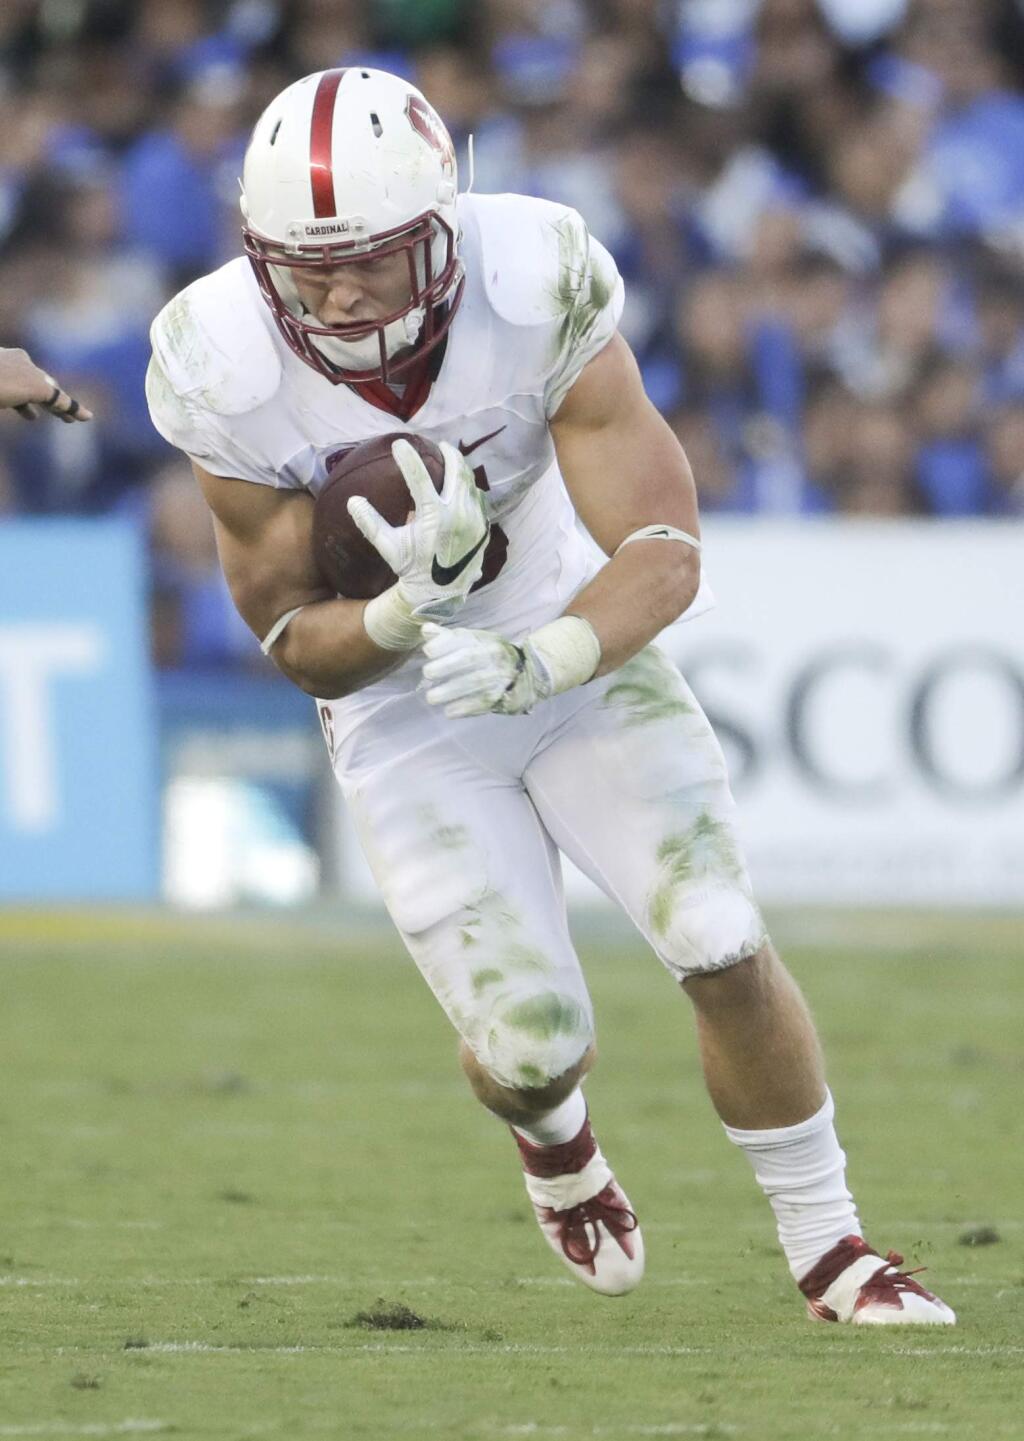 This Sept. 24, 2016 photo shows Stanford running back Christian McCaffrey running against UCLA during the first half in Pasadena. Stanford coach David Shaw said McCaffrey is feeling better and is hopeful that the 2015 Heisman Trophy finalist will be back in the lineup against Colorado on Saturday. (AP Photo/Chris Carlson, file)